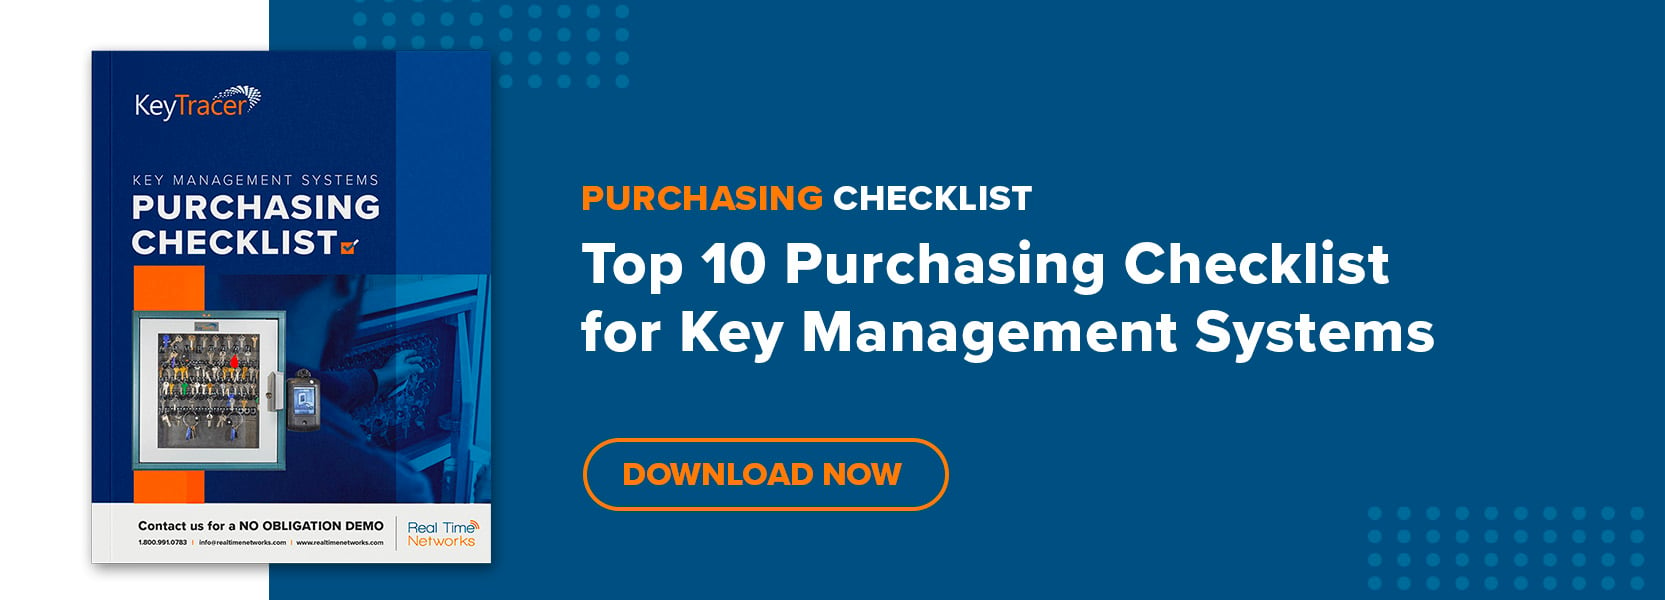 Top 10 Purchasing Checklist for Key Management Systems